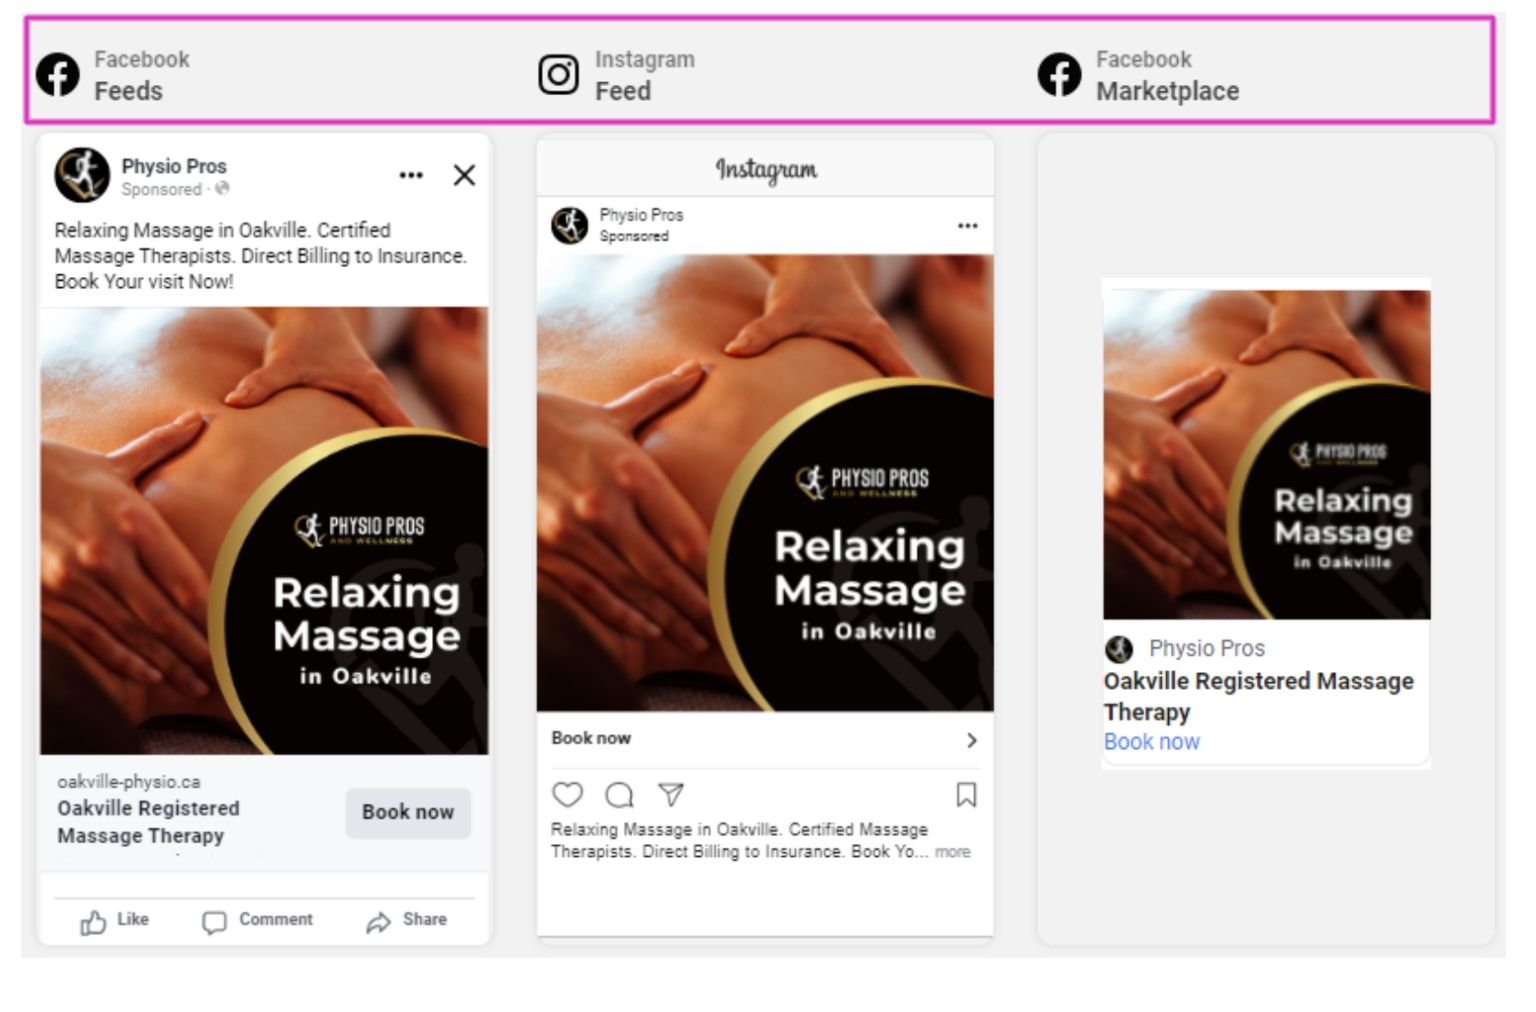 Physio Pros PPC - screenshots of Facebook feed, Instagram feed, and Facebook Marketplace